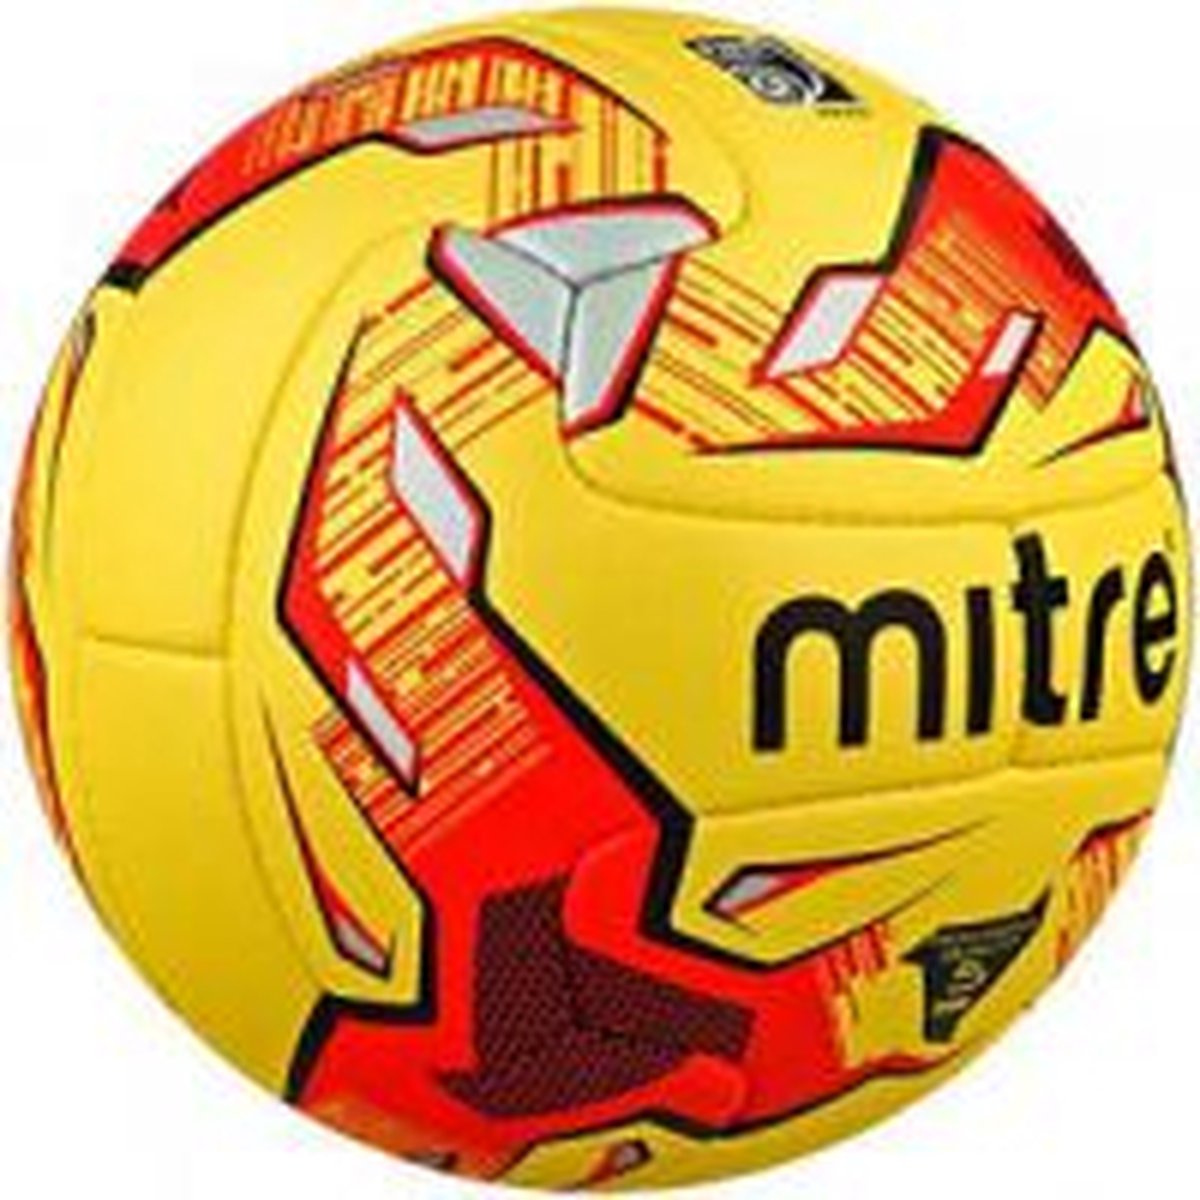 Mitre Delta Fluo V12S Voetbal - Professional Quality - Maat 5